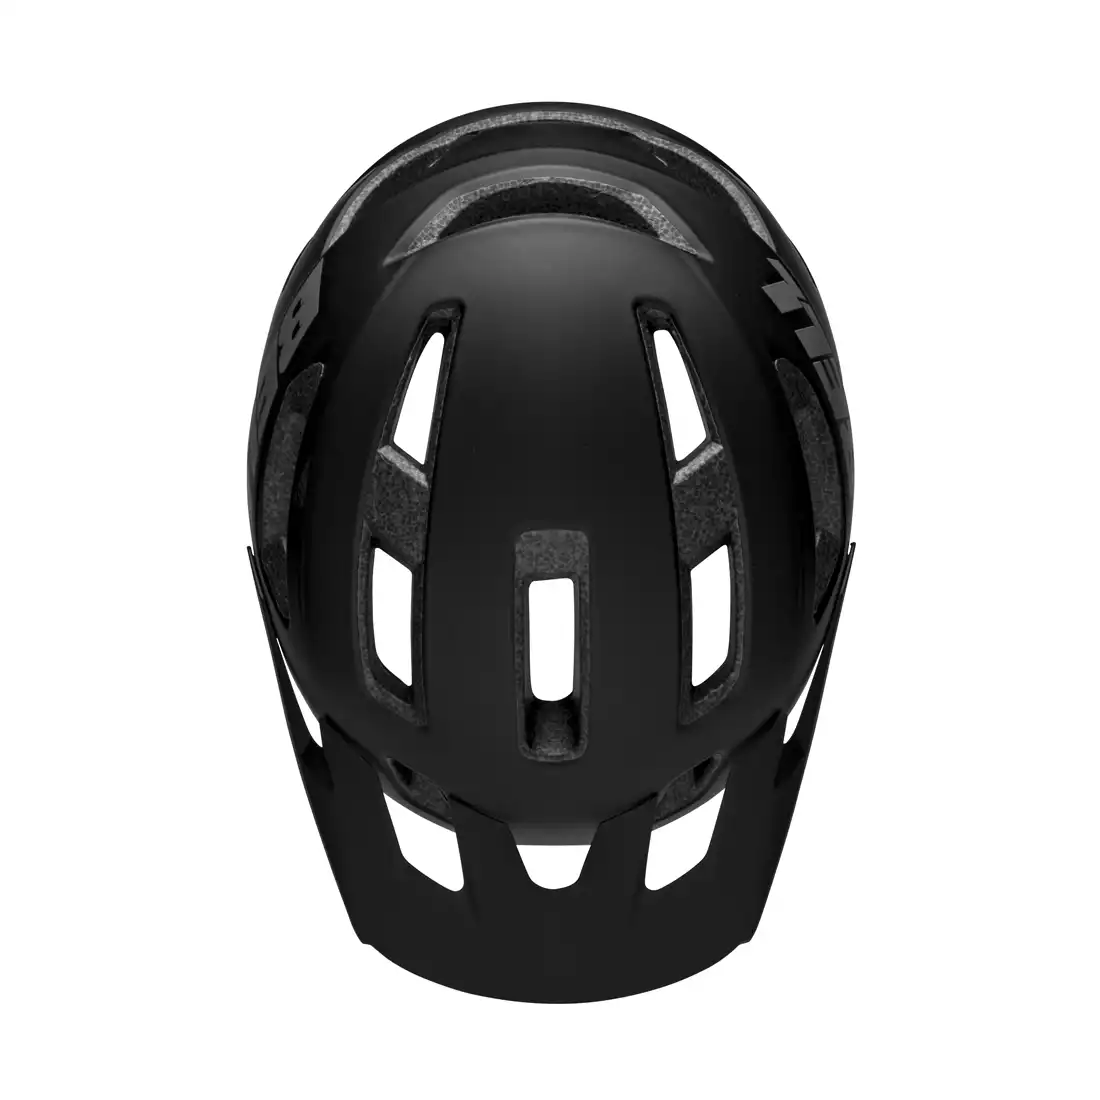 BELL NOMAD 2 INTEGRATED MIPS Kask rowerowy MTB, czarny